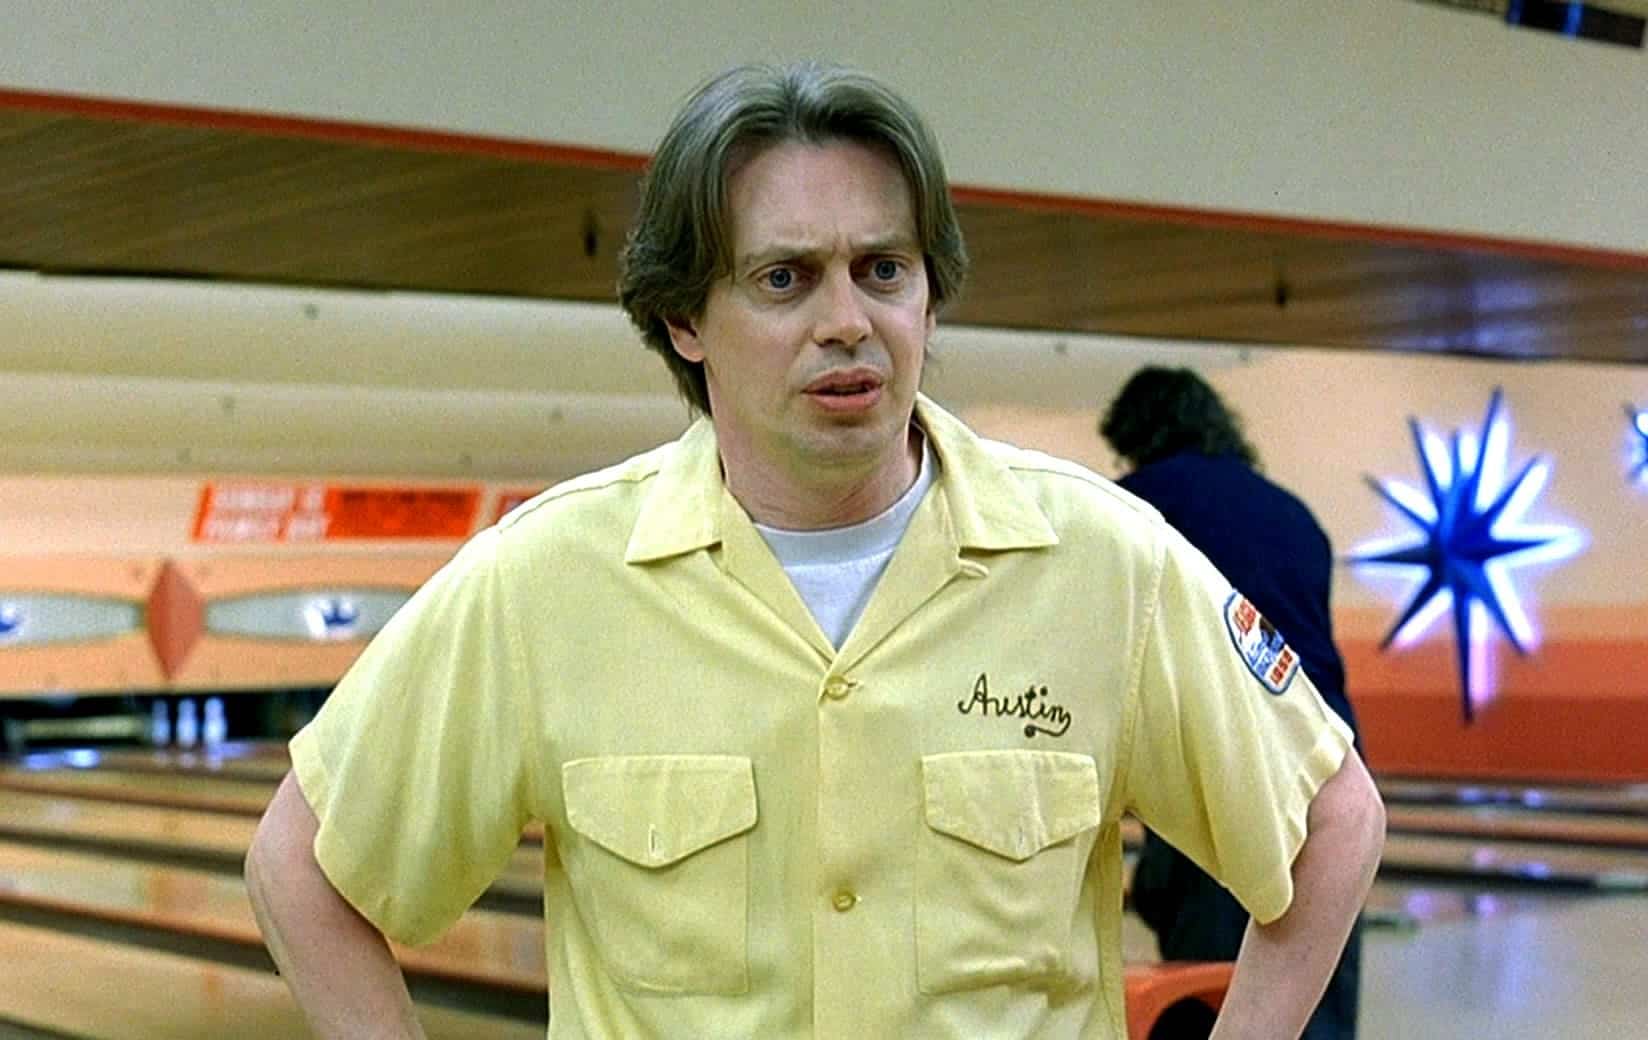 Steve Buscemi in this image from DIRECTV